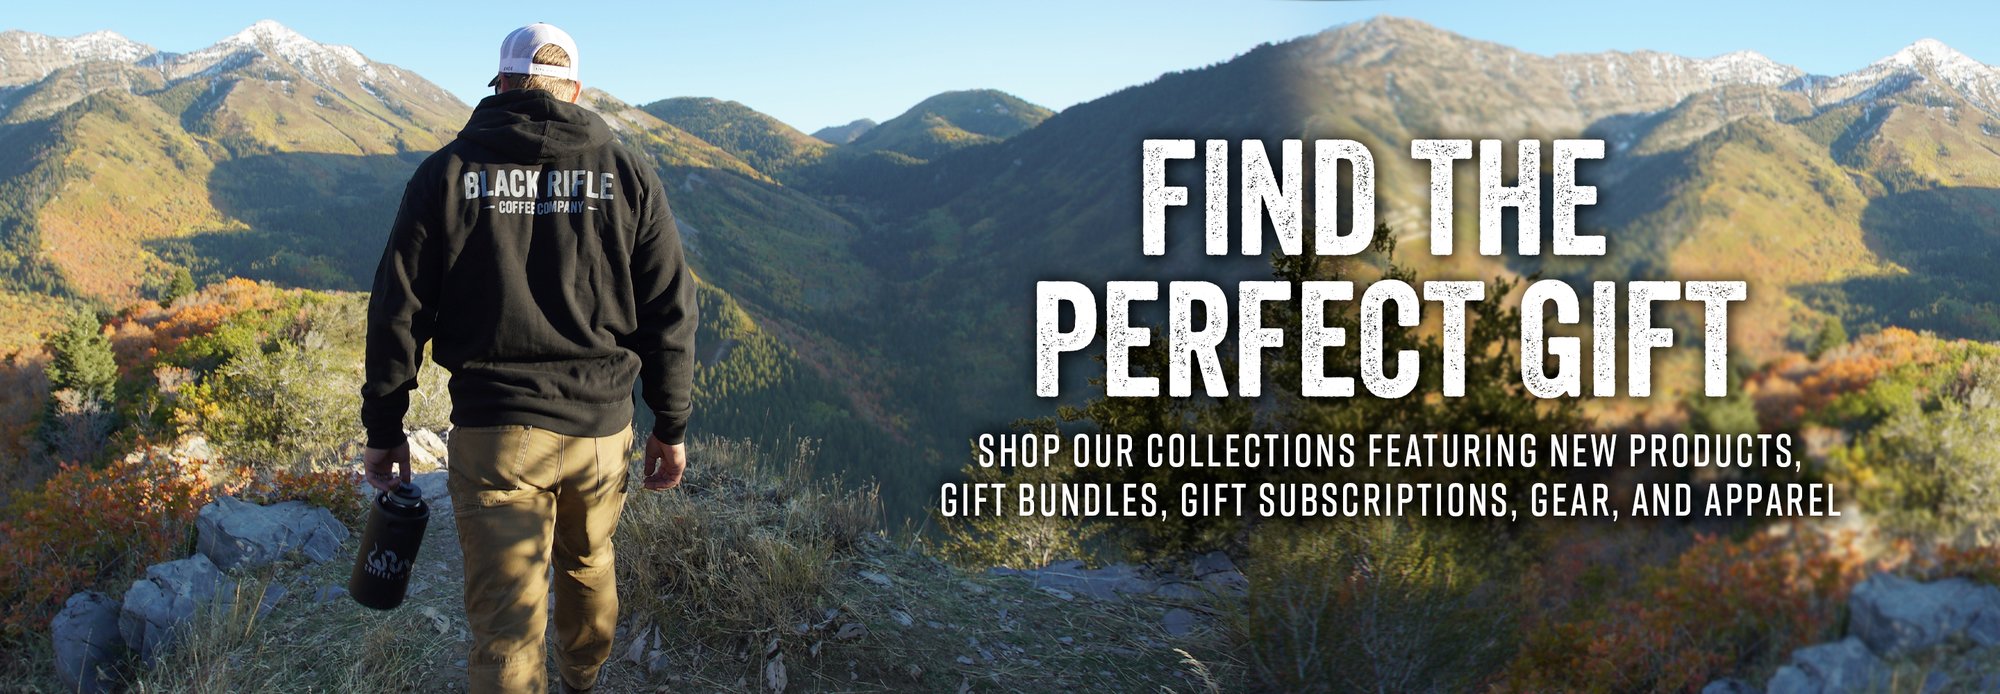 FInd the Perfect Gift